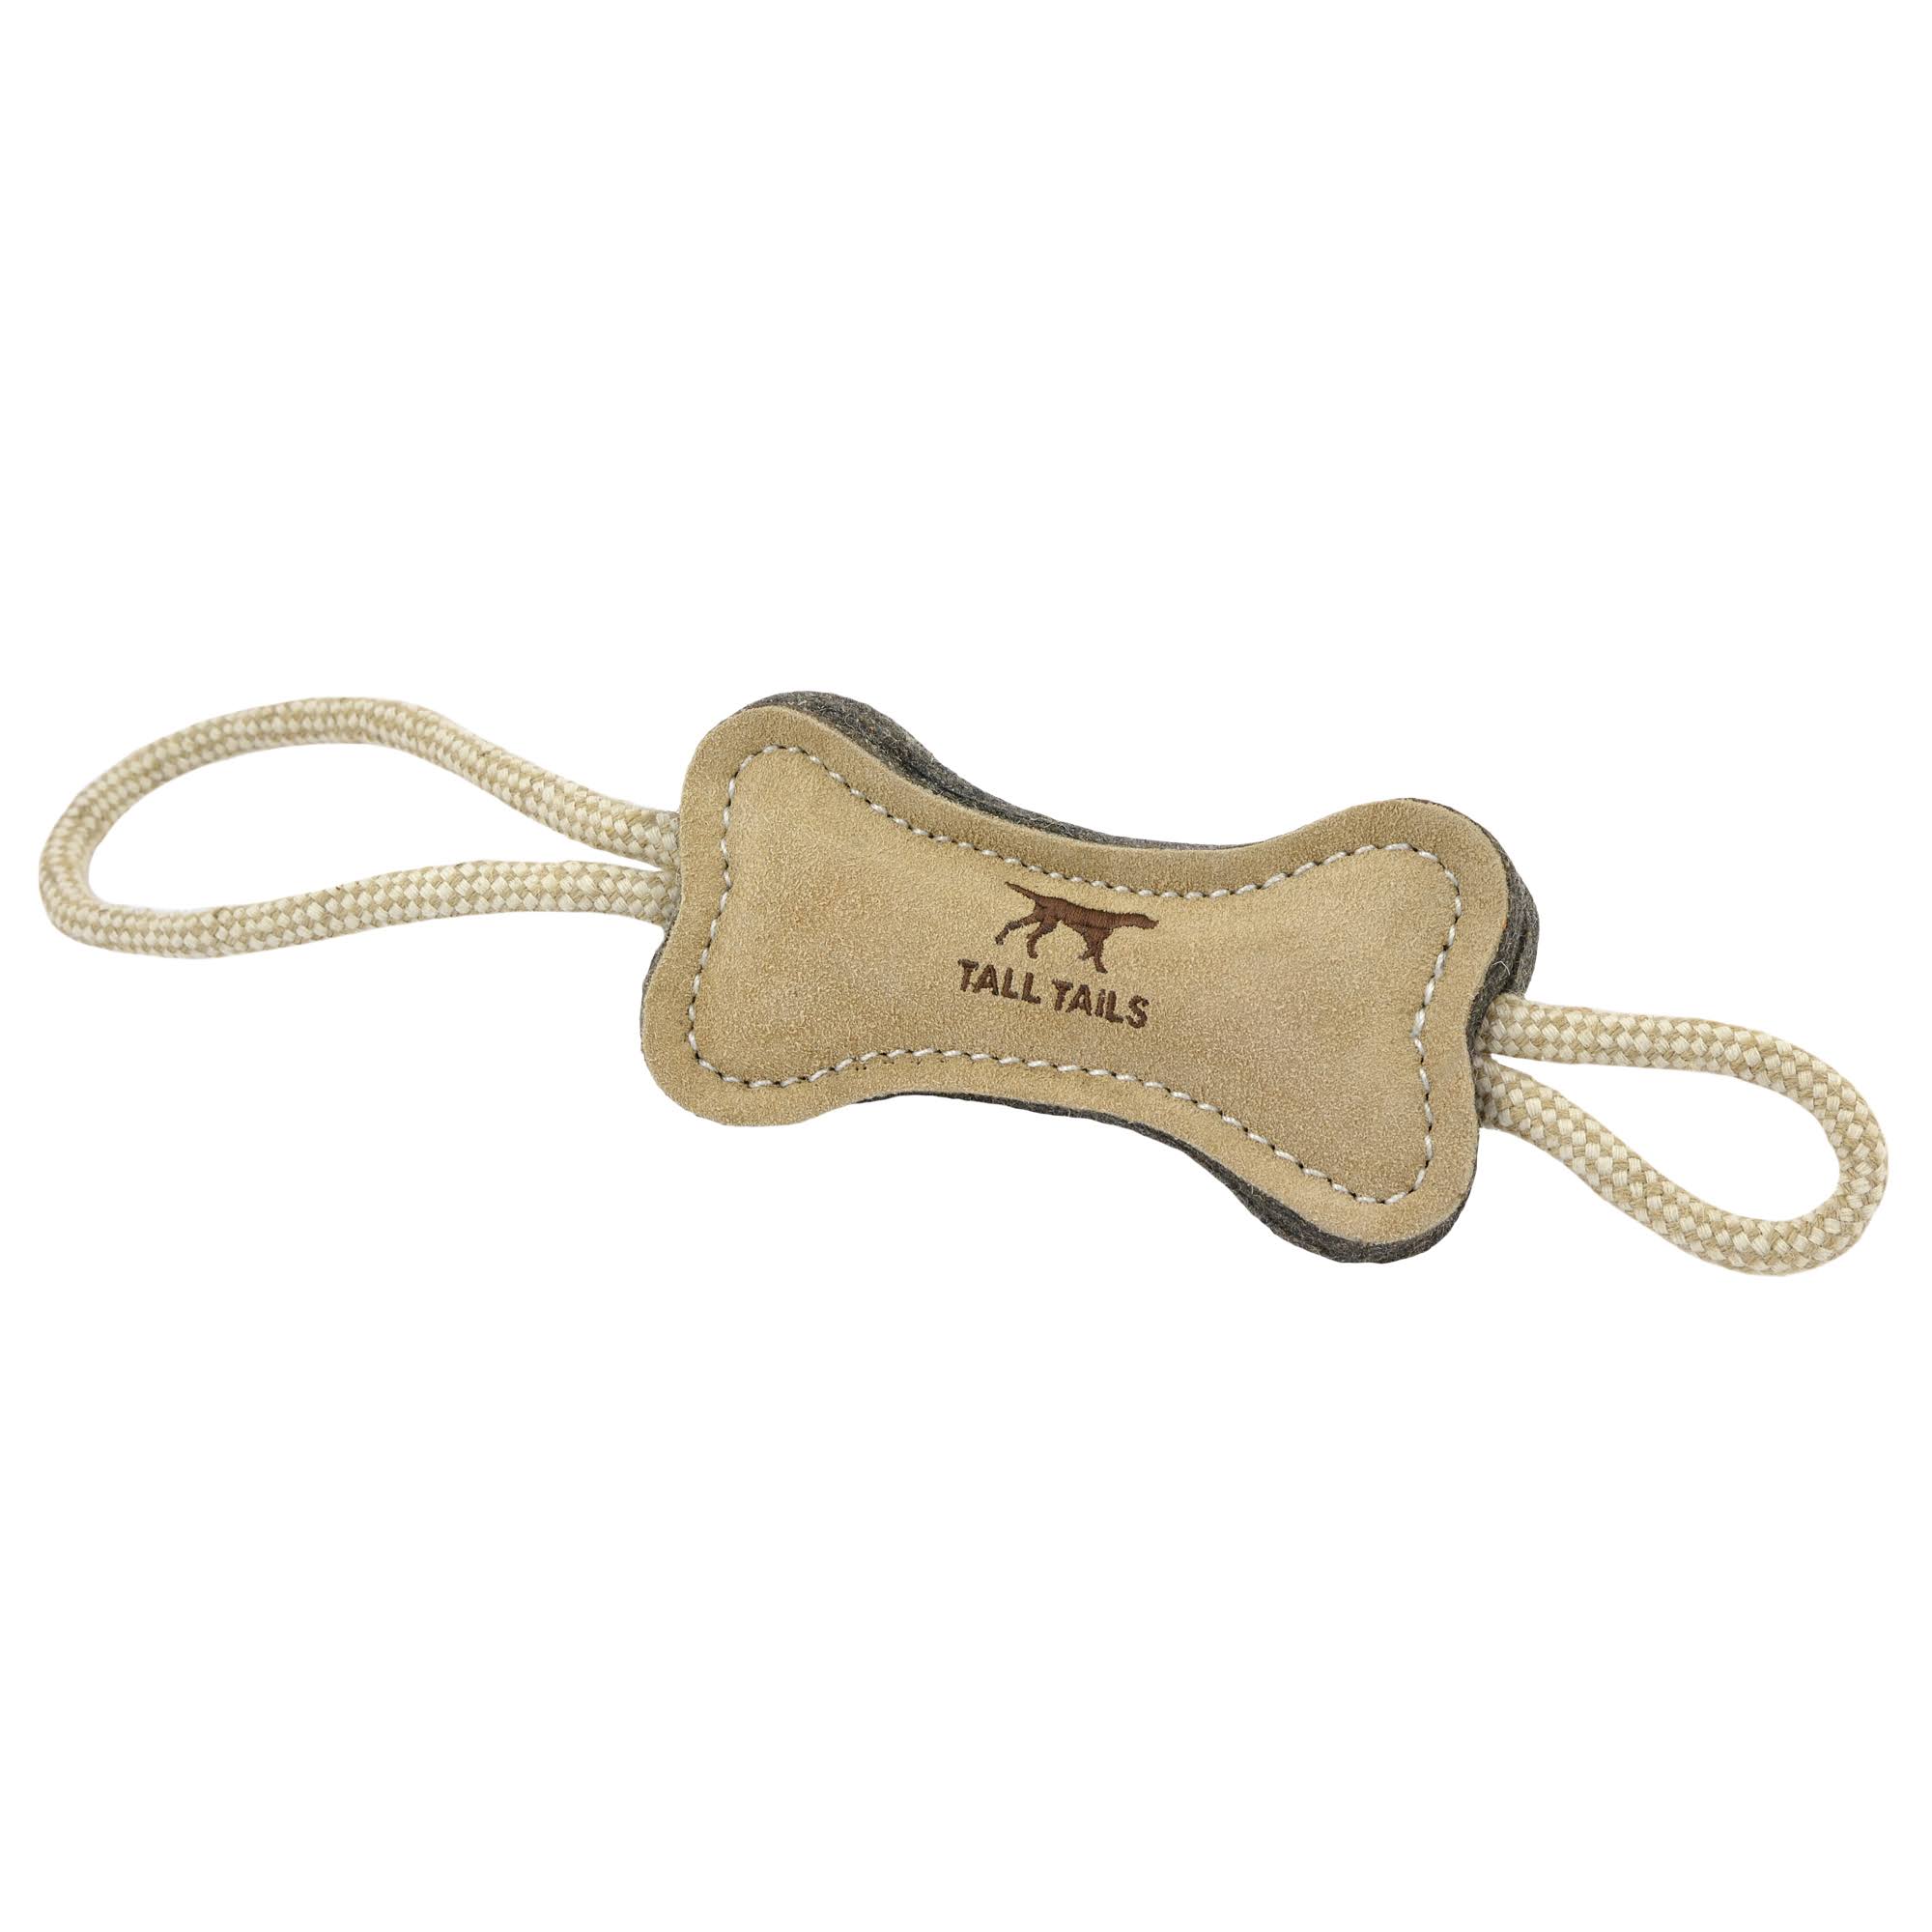 Tall Tails Natural Leather Bone Tug Dog Toy, 12-In.